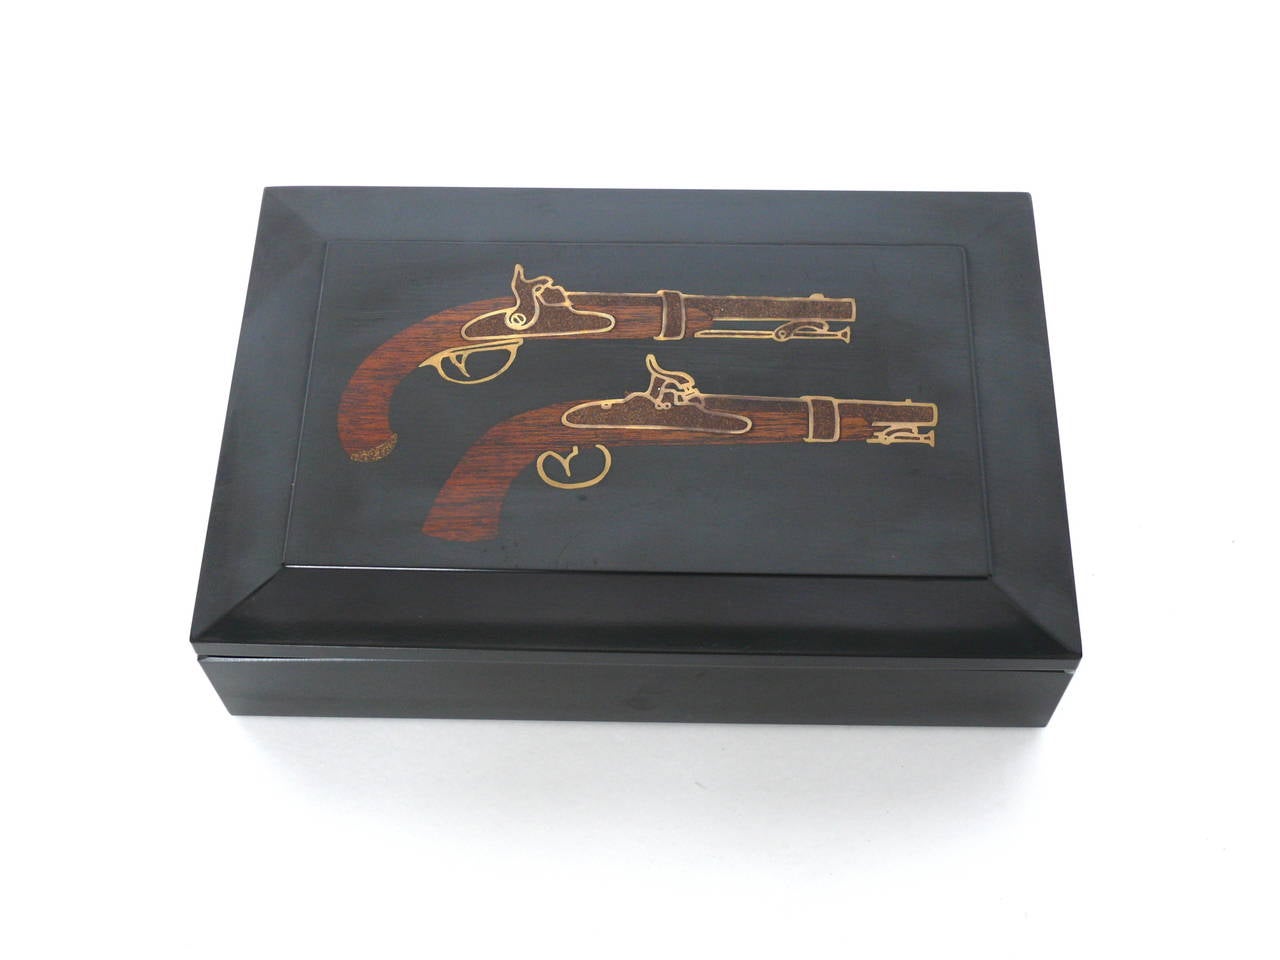 Handsome black box by Couroc of Monterrey. Box features two dueling pistols. Piece is in excellent vintage condition. Great object!